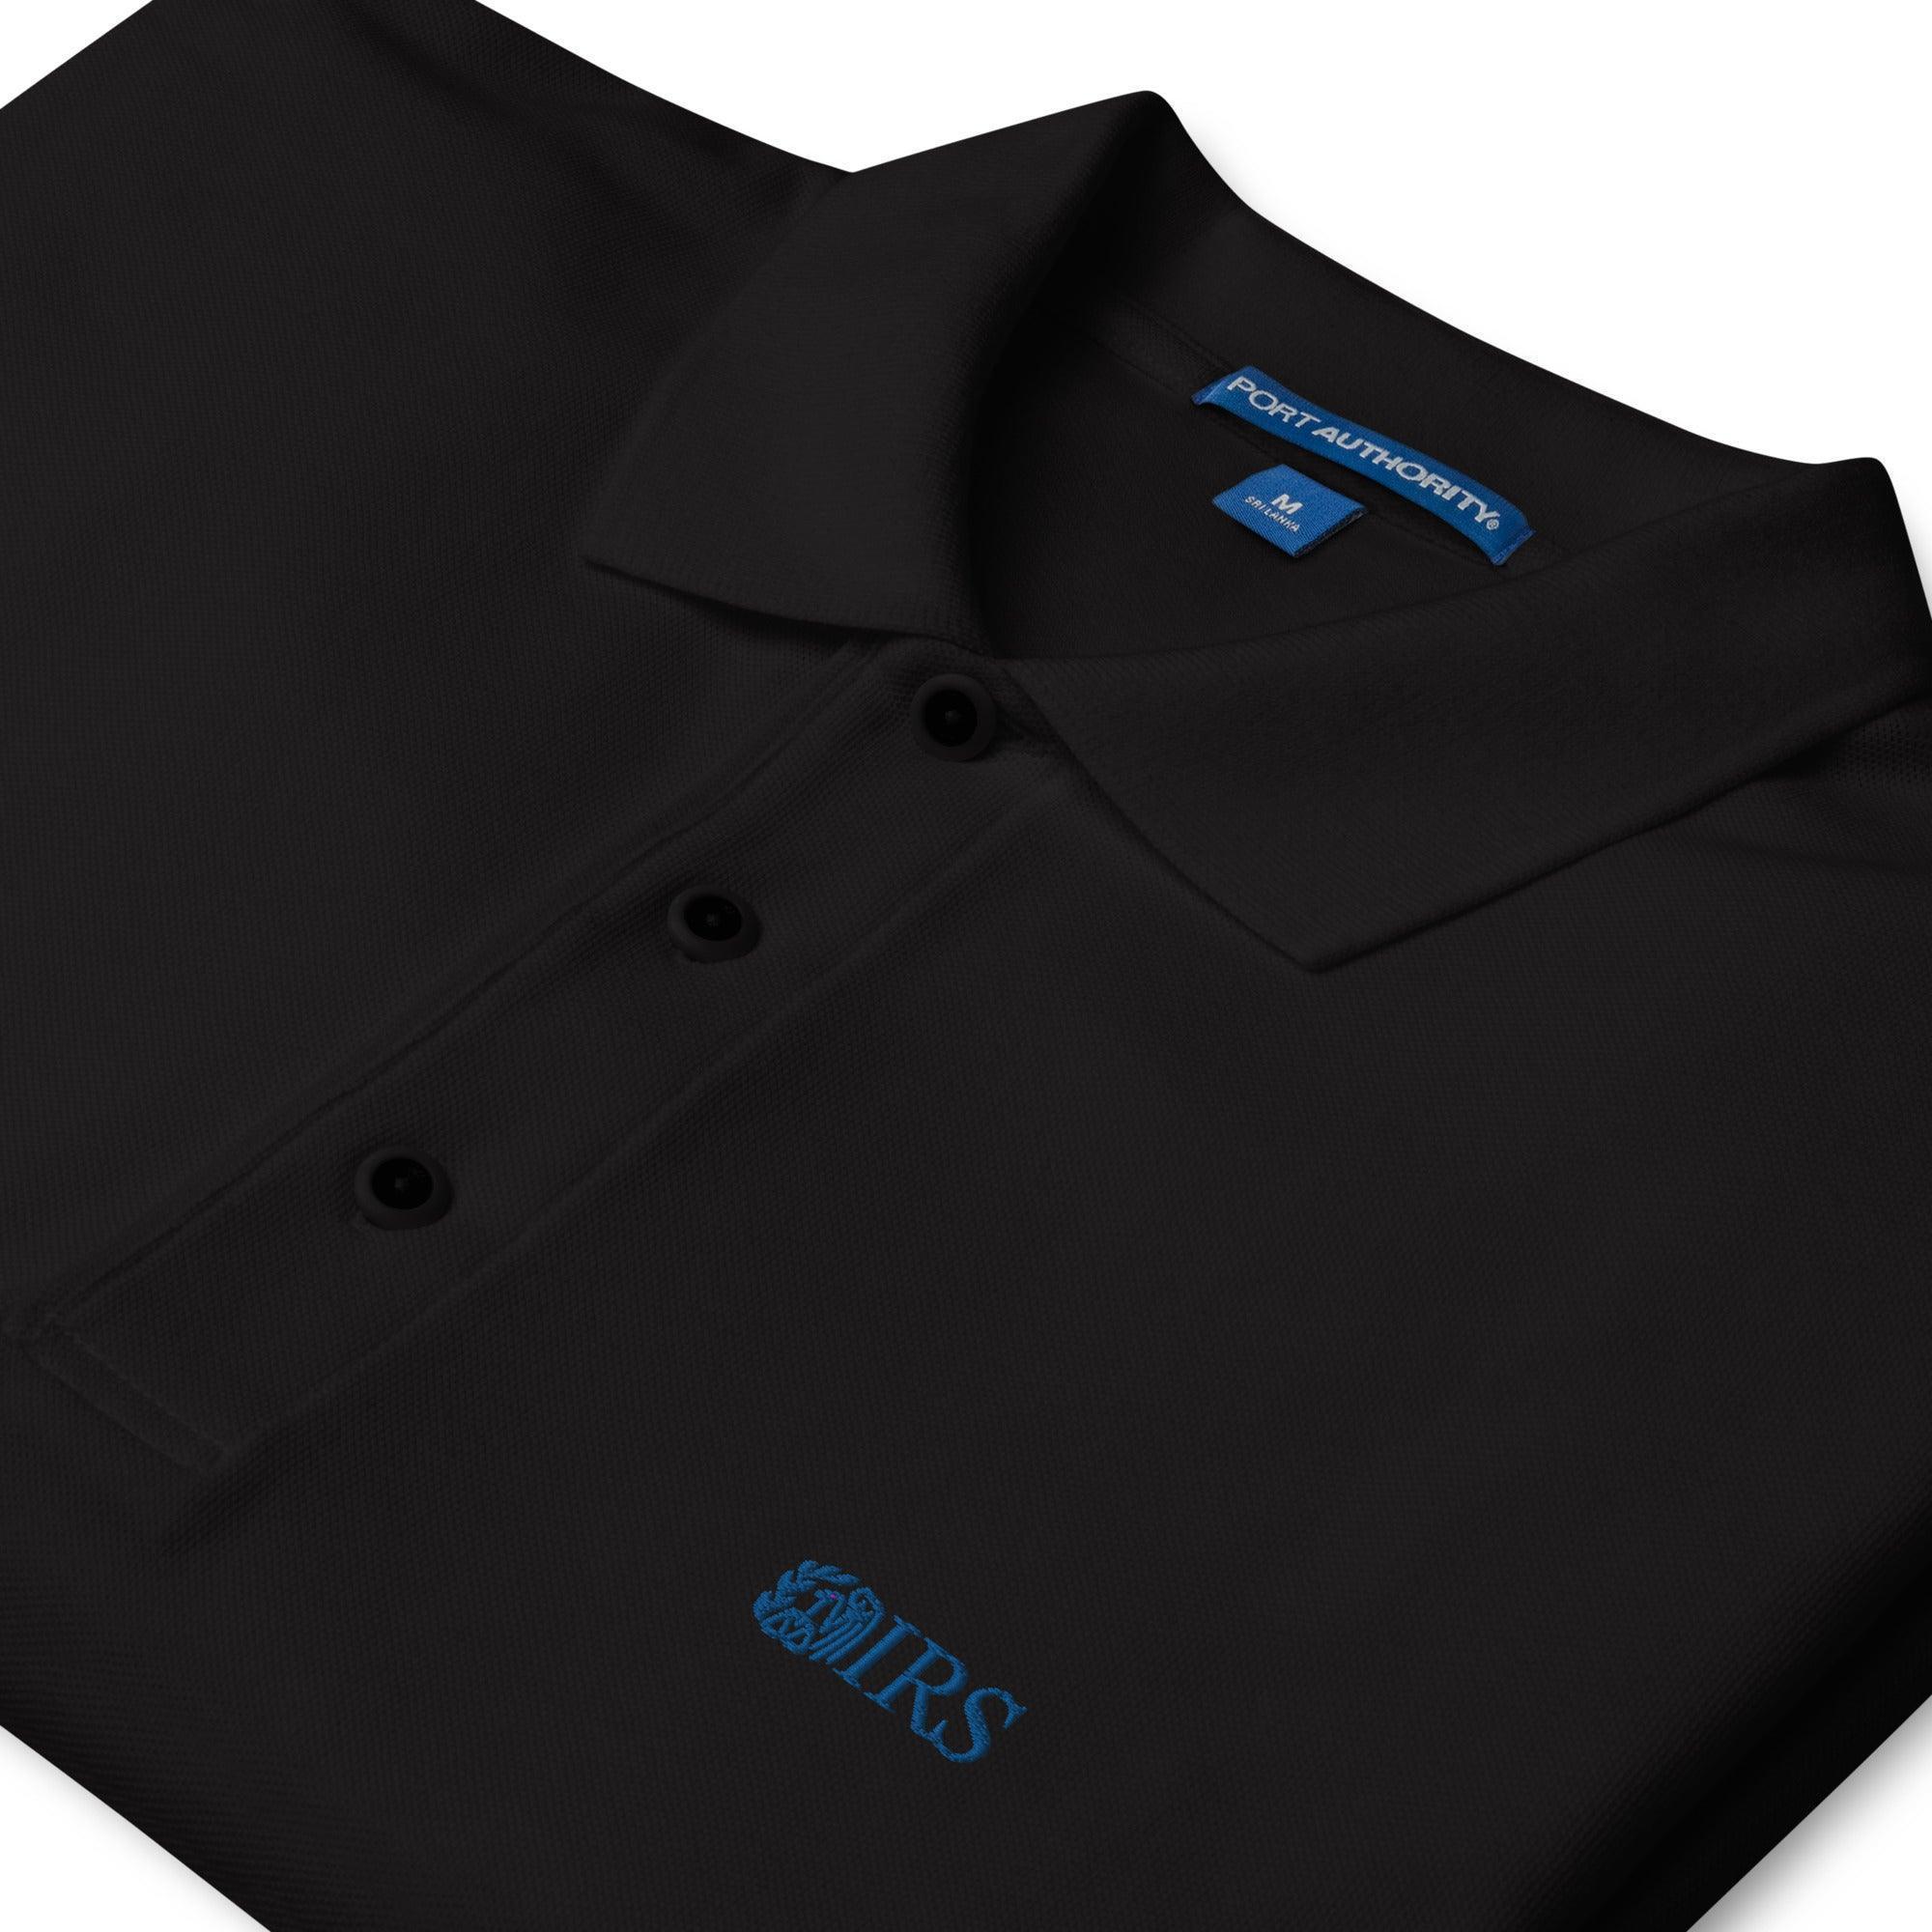 IRS Polo Shirt - InvestmenTees